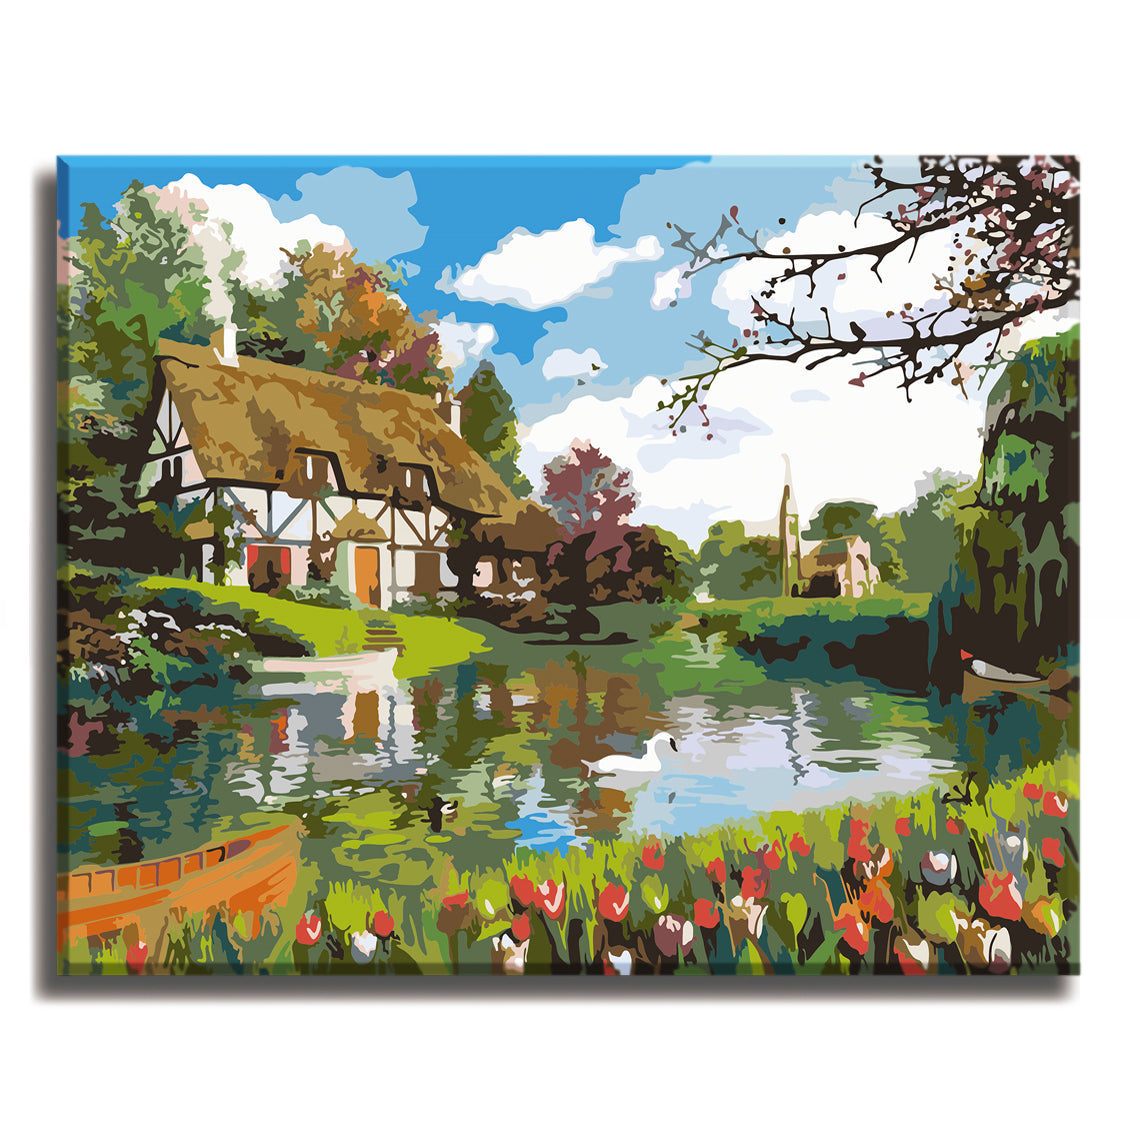 The Quiet Creek - Paint by Numbers Kit for Adults DIY Oil Painting